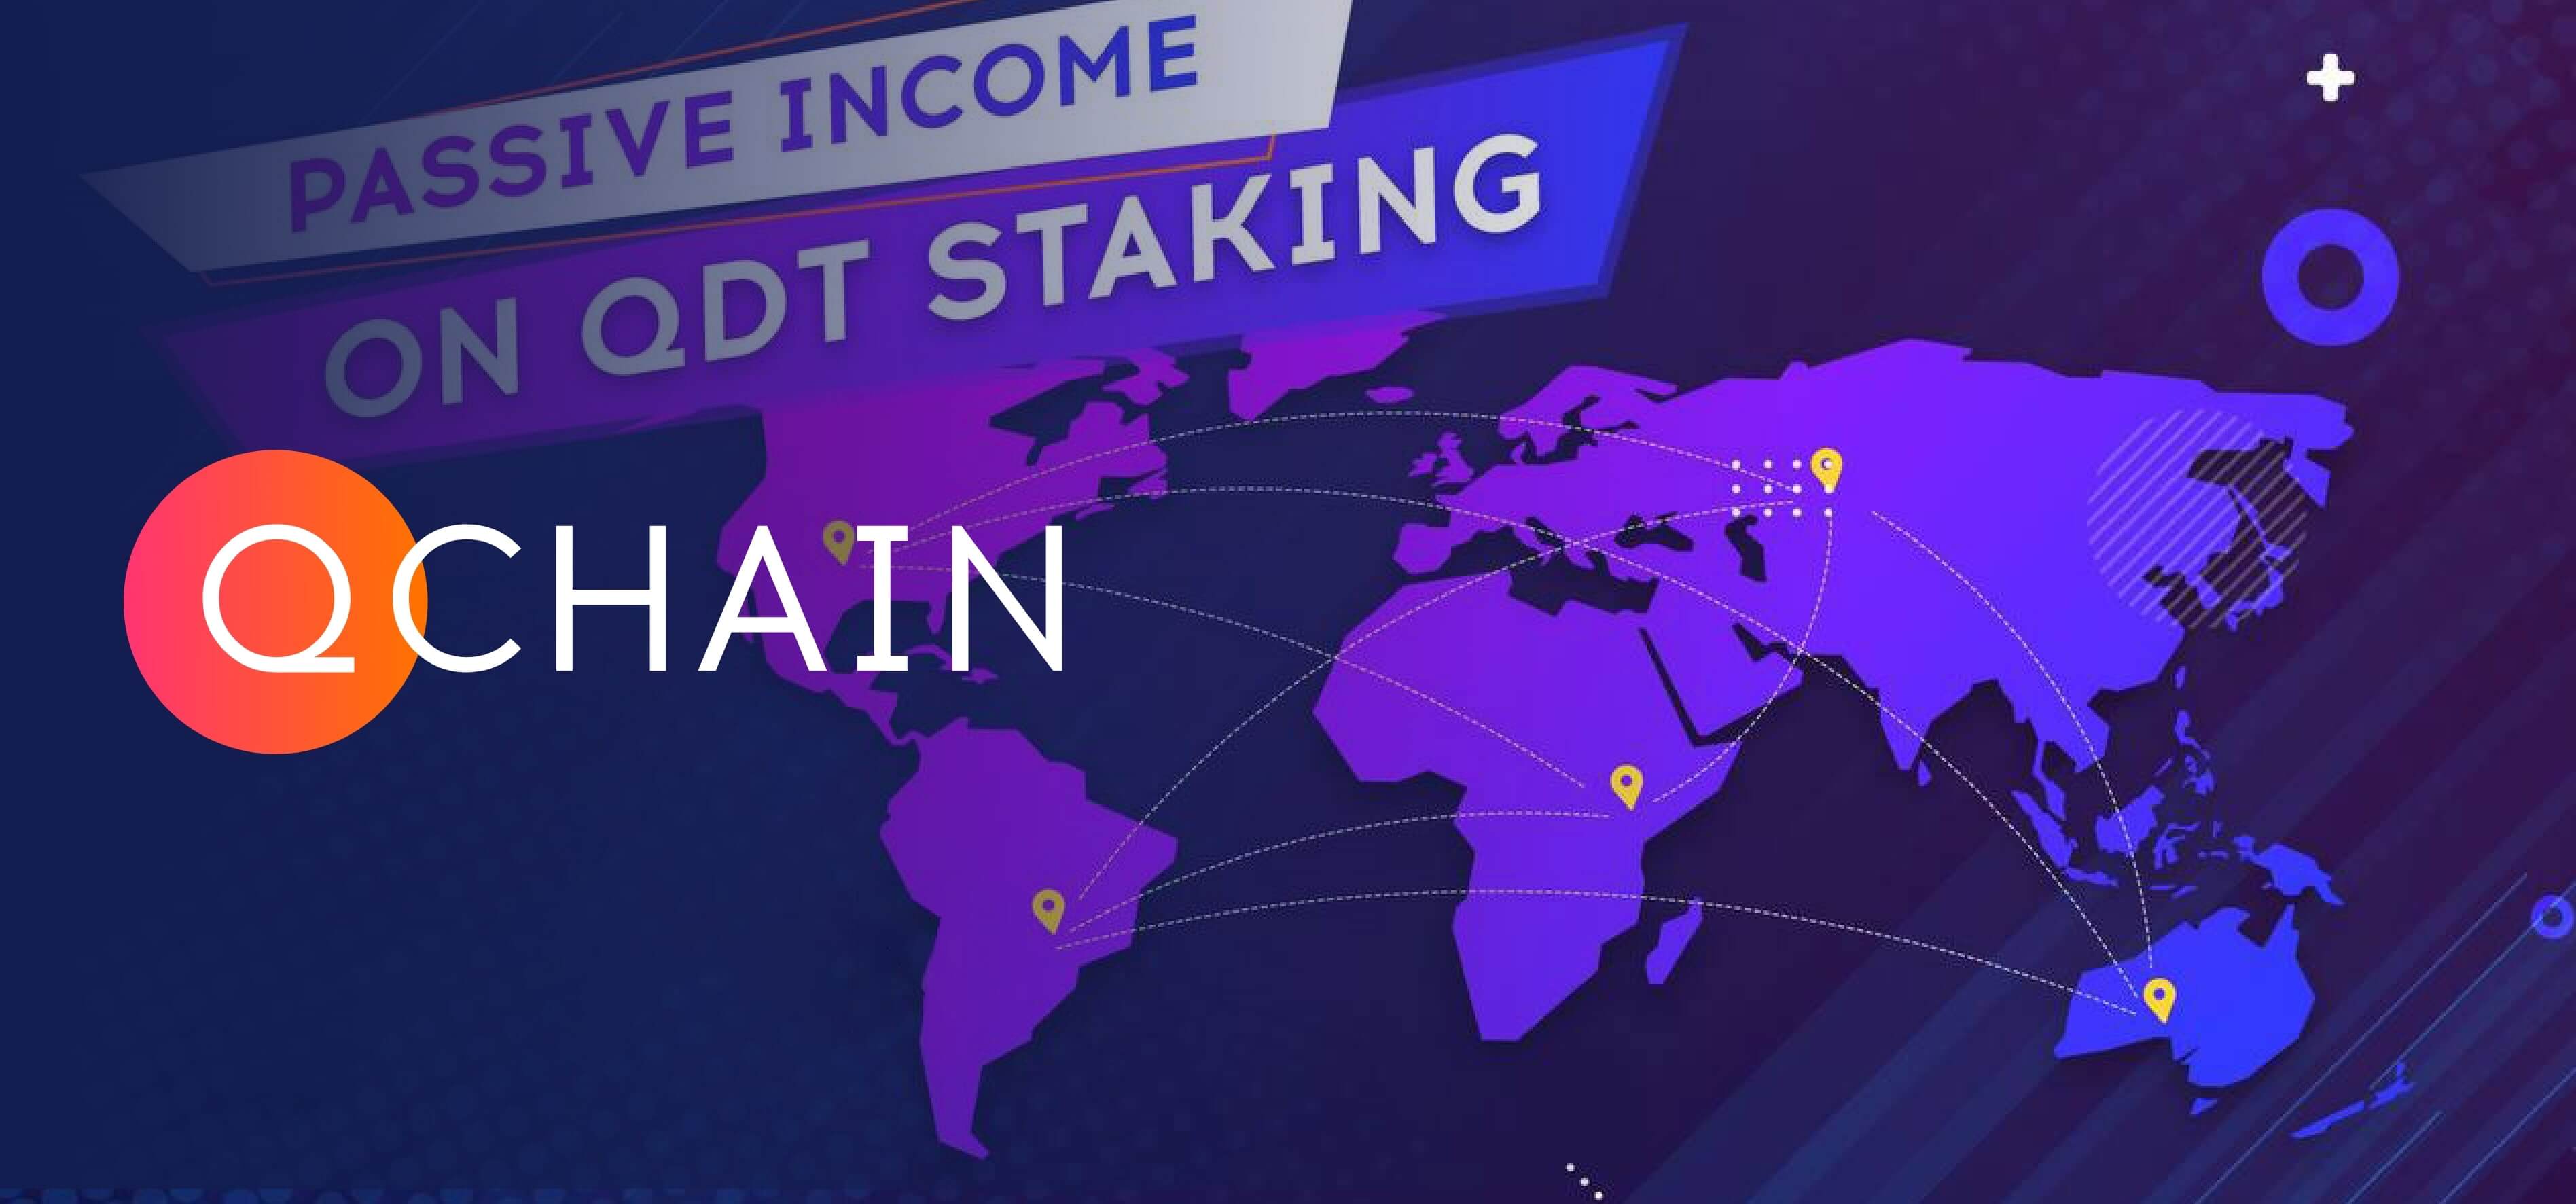 Passive Income with Staking QDT